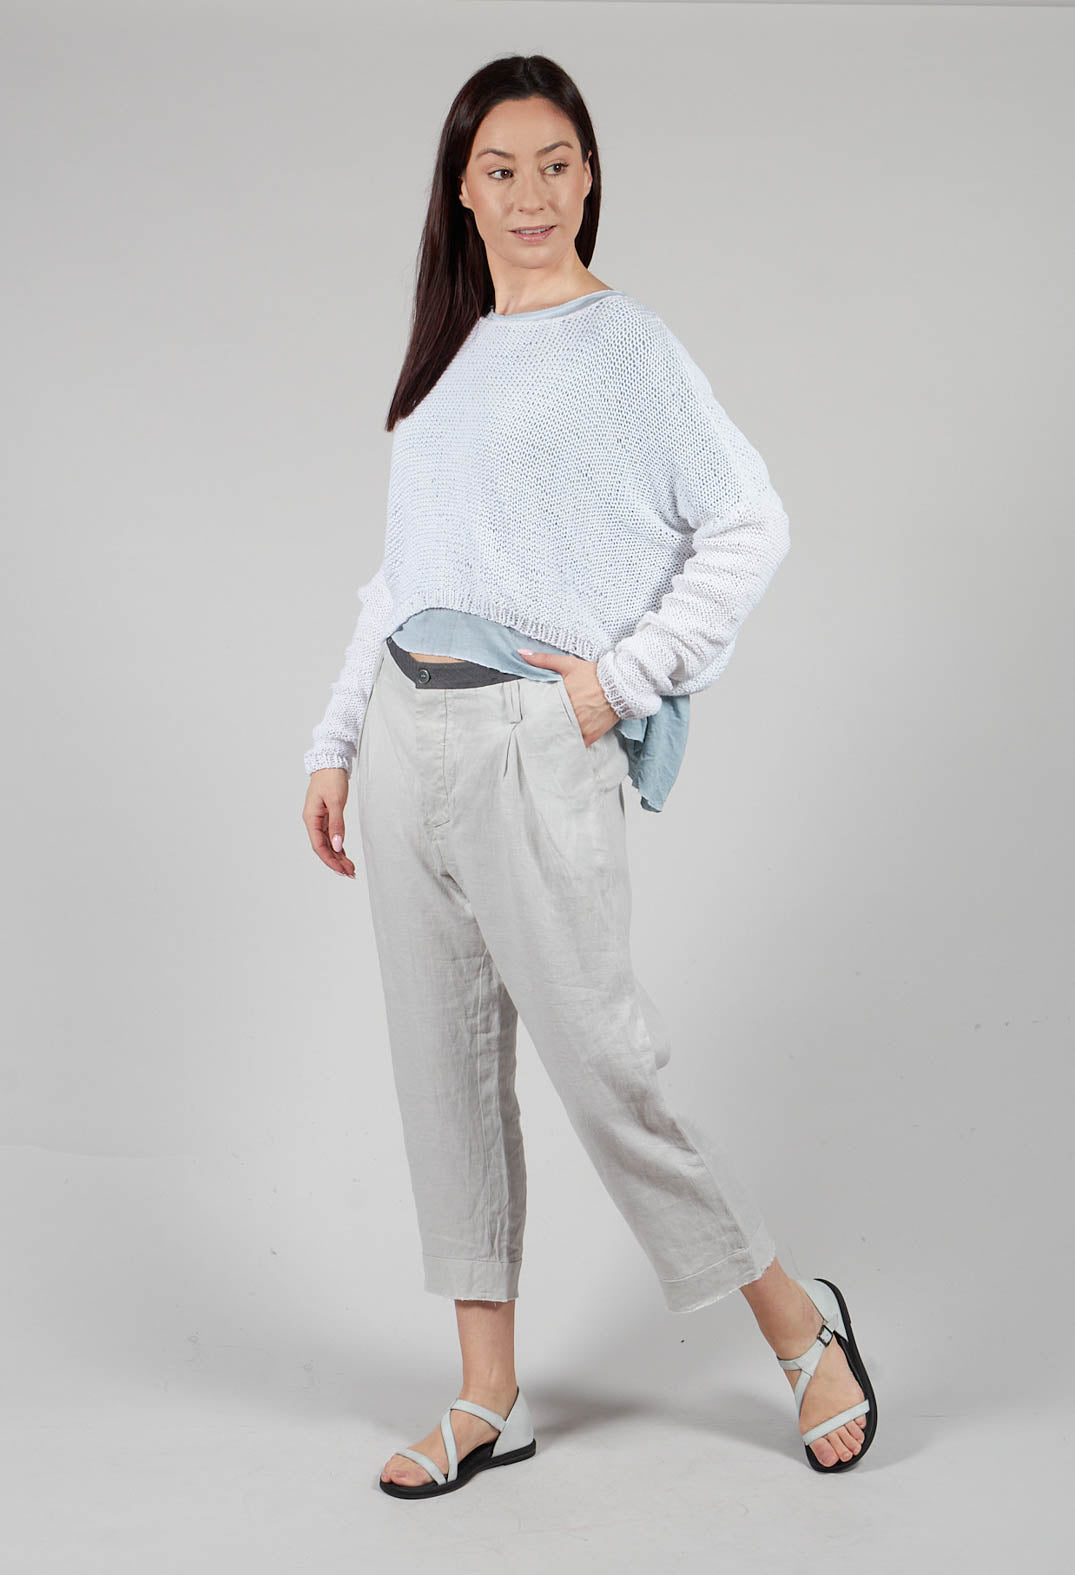 High Waisted Cropped Trousers with Fringed Hem in Grey Original